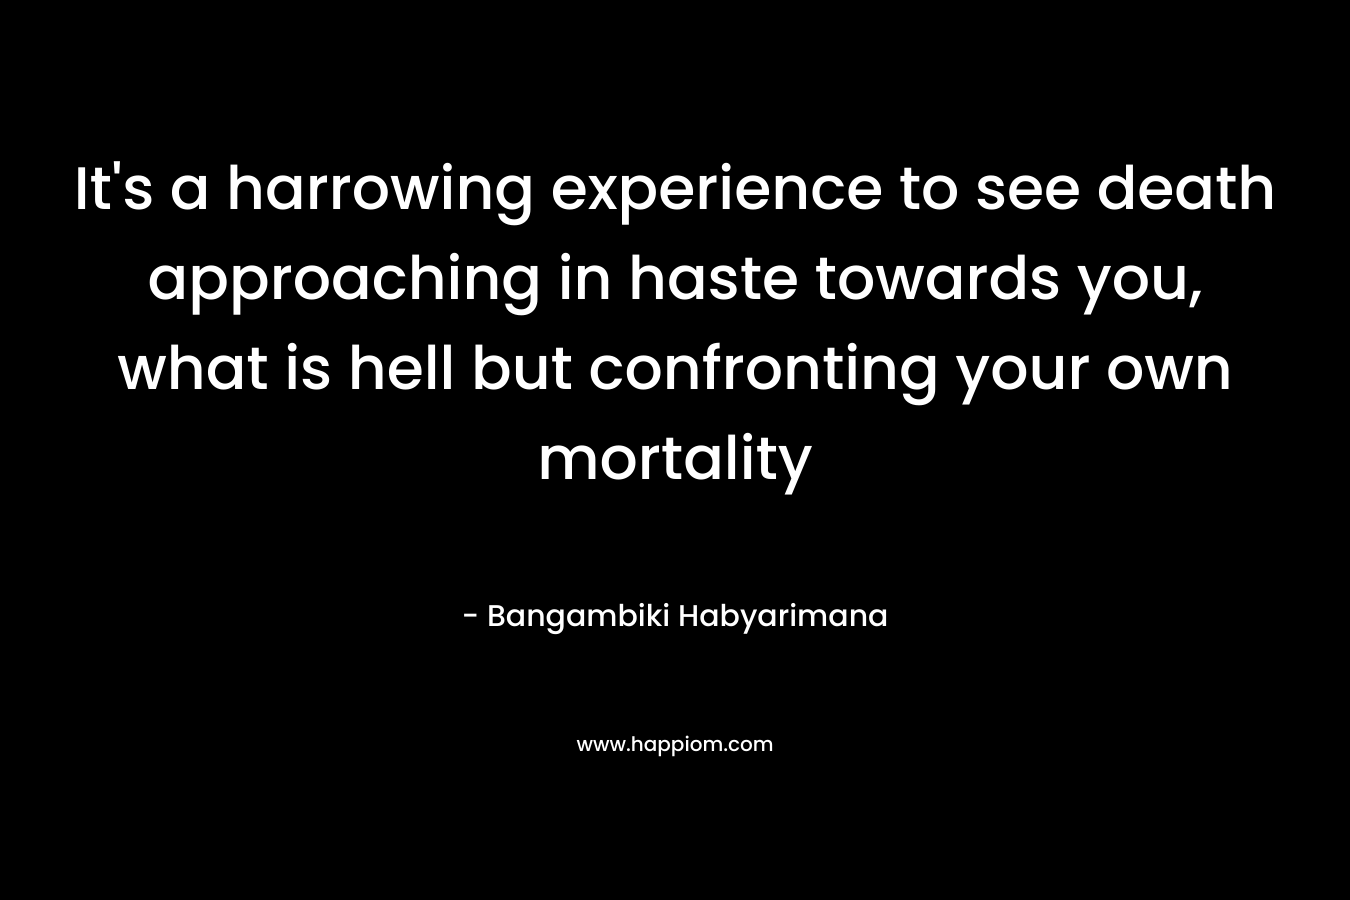 It's a harrowing experience to see death approaching in haste towards you, what is hell but confronting your own mortality